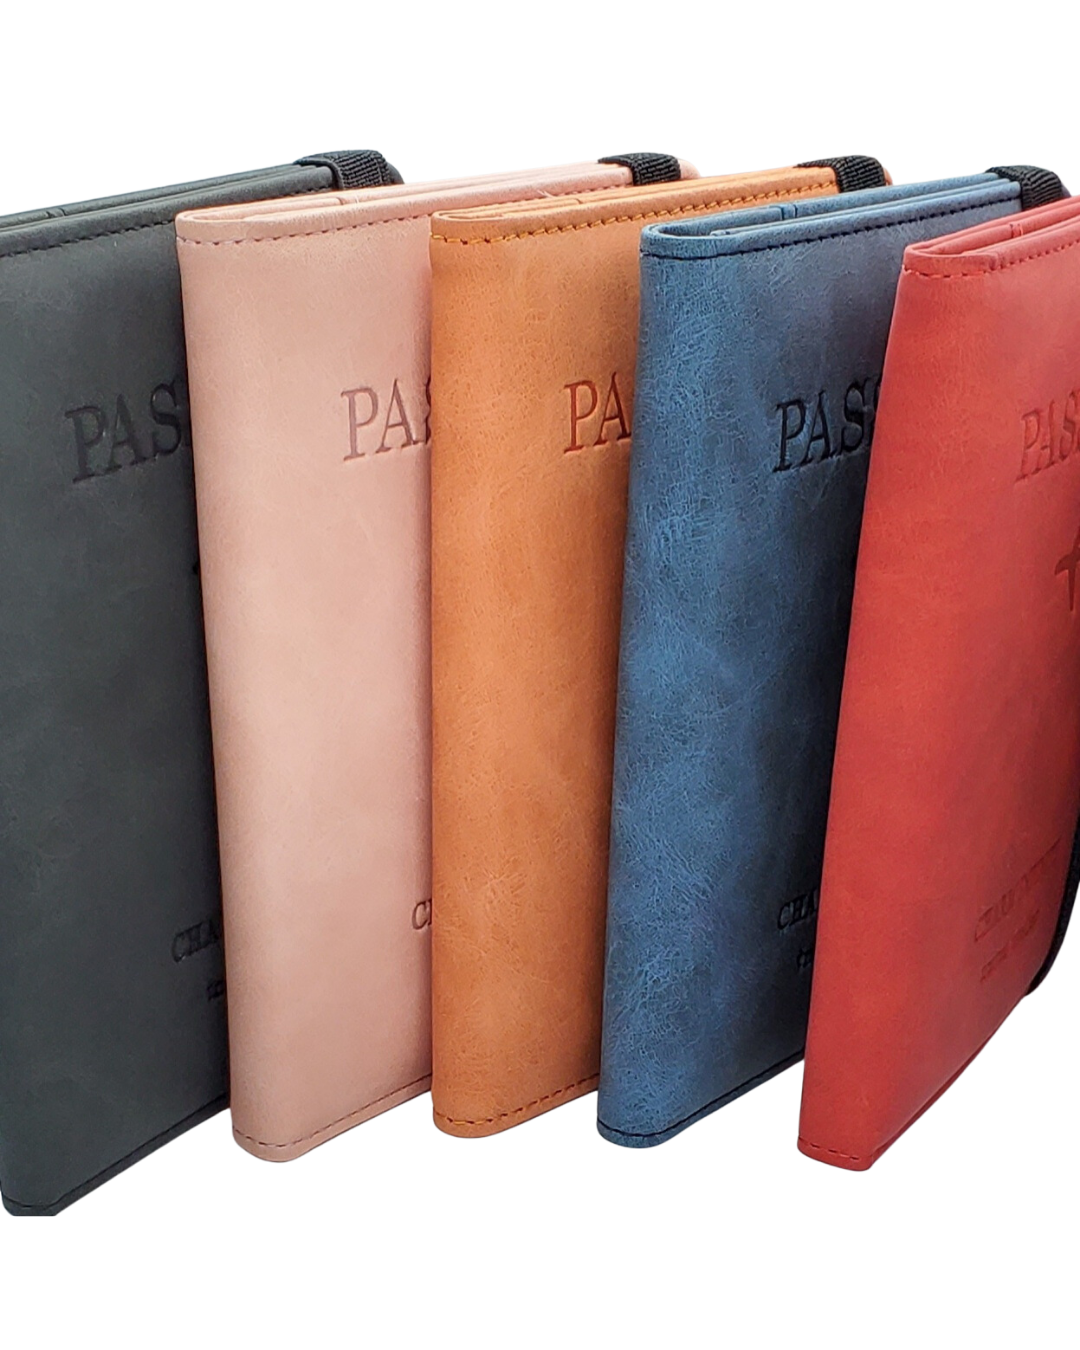 image of premium leather passport RIFD wallets. the colors are black, pink, orange, blue, and red. a strap holds the wallet close. 